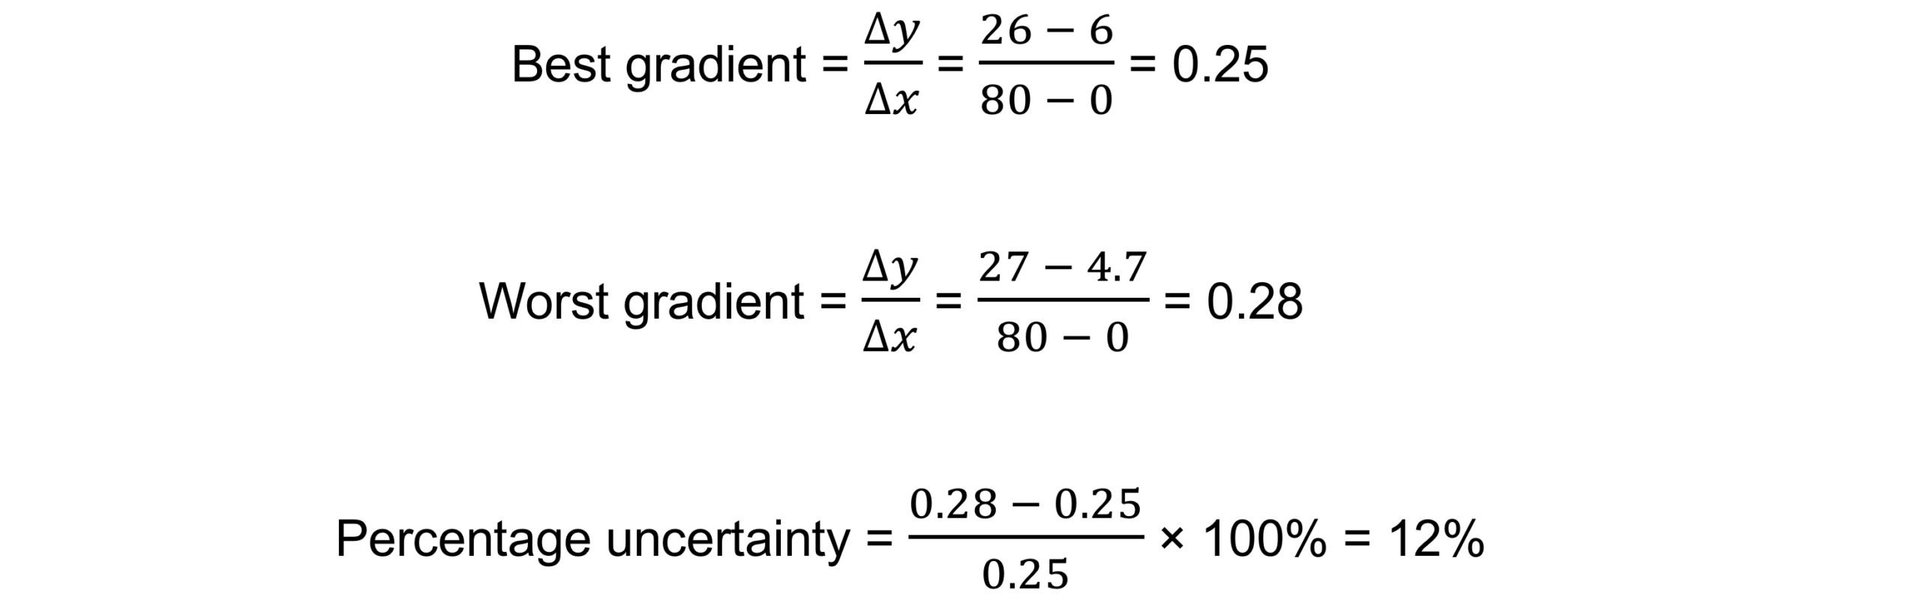 Uncertainty-in-Gradient-Calculation-1-scaled